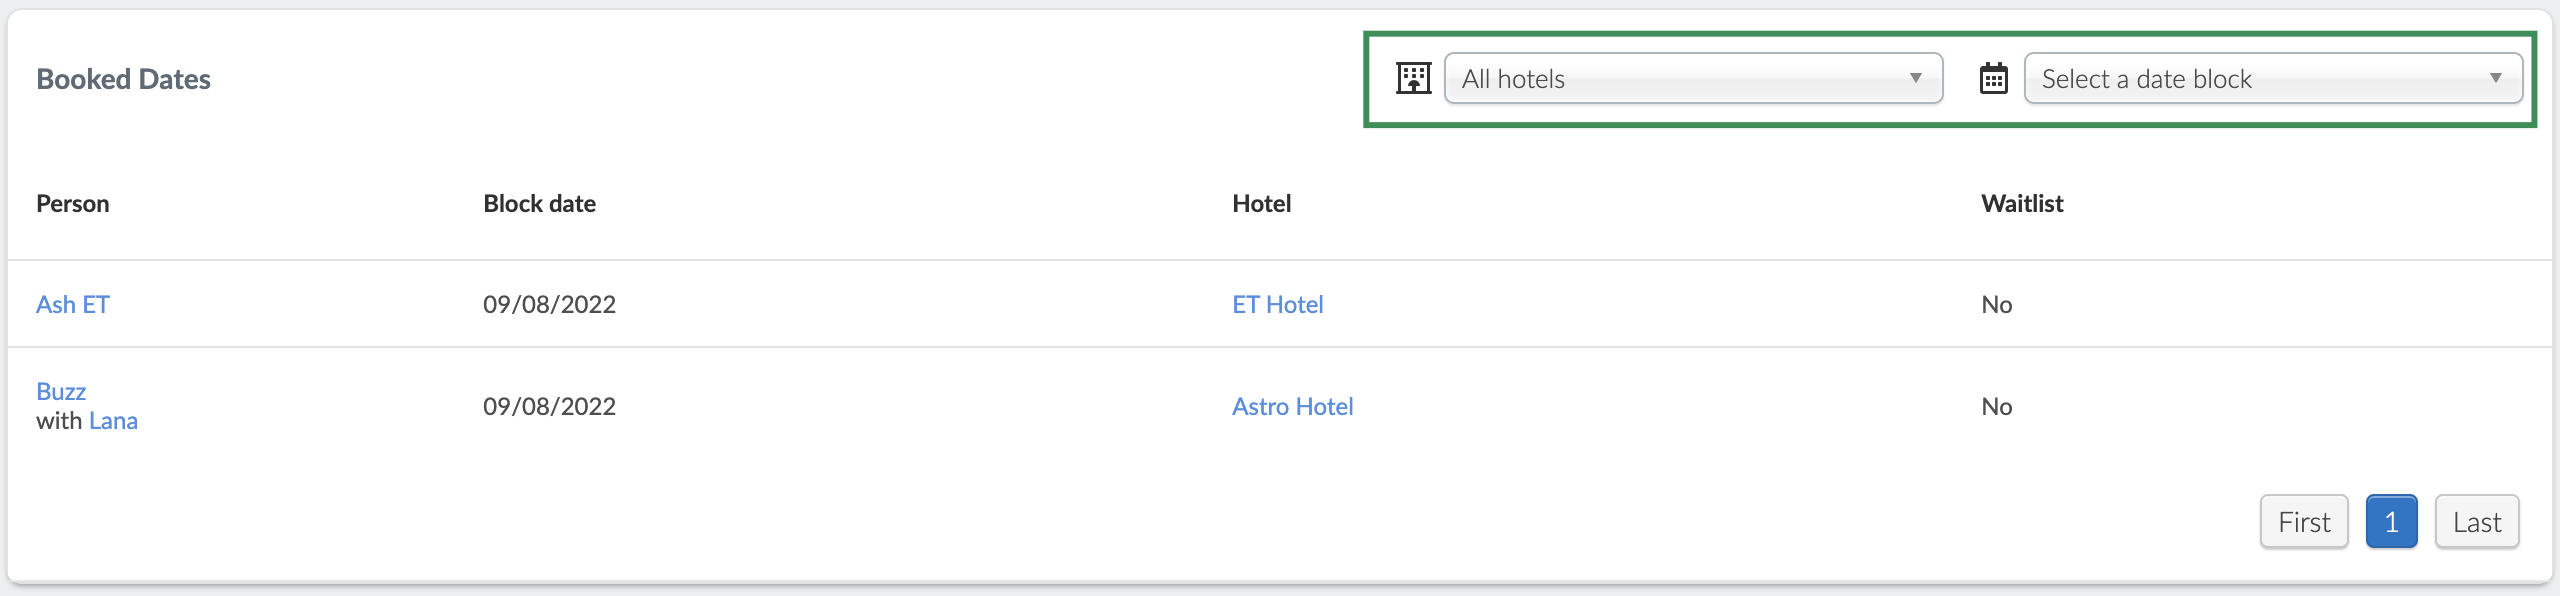 Image showing the two available filters on the booked dates poge